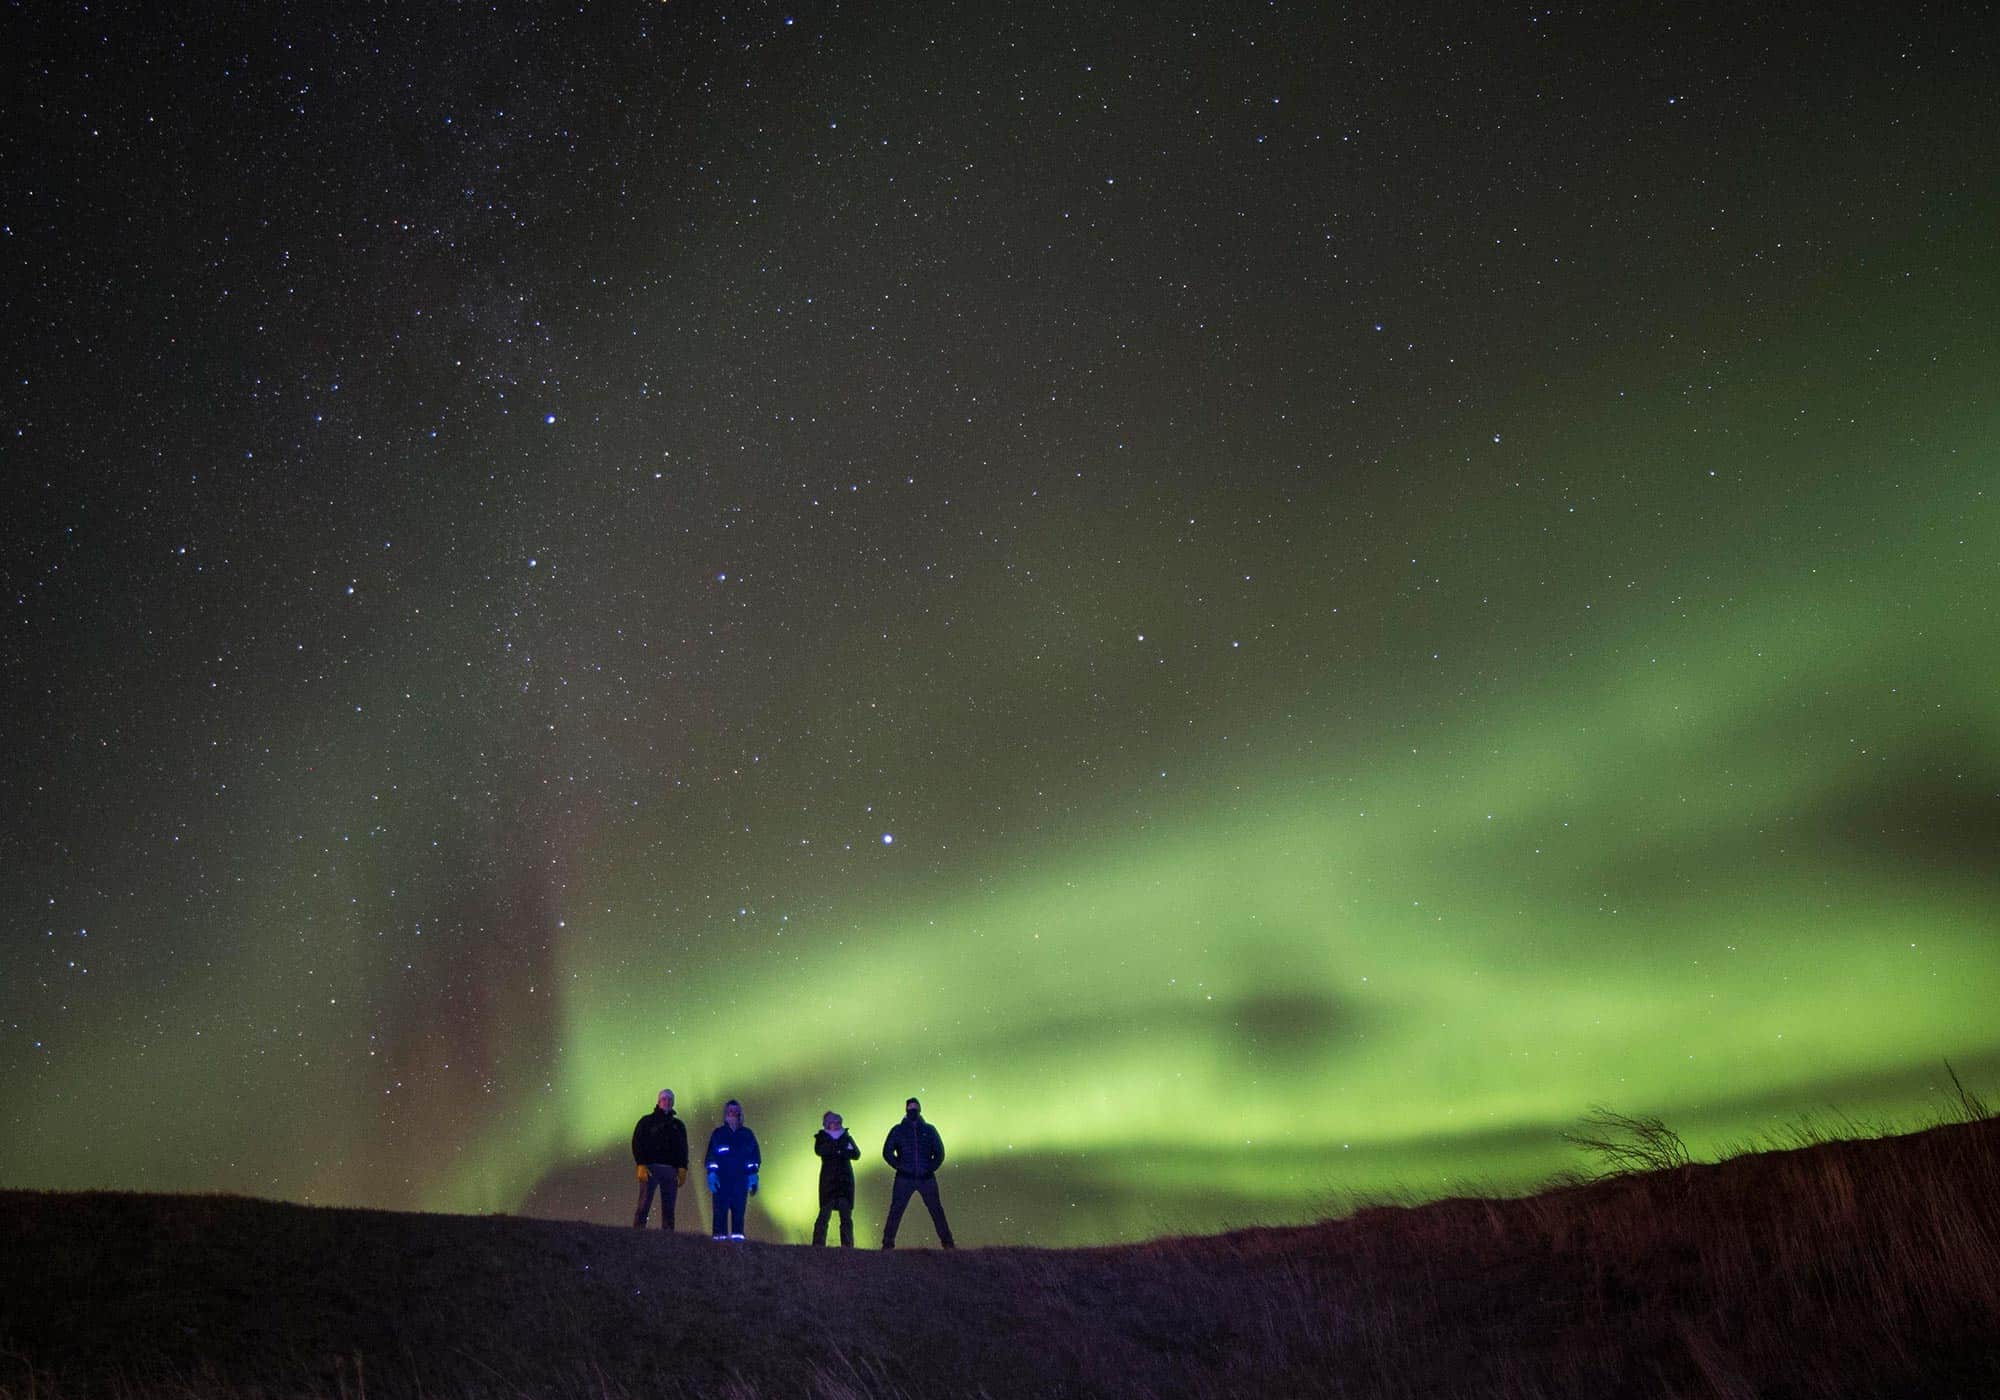 Four people stand underneath the night sky filled with green northern lights.